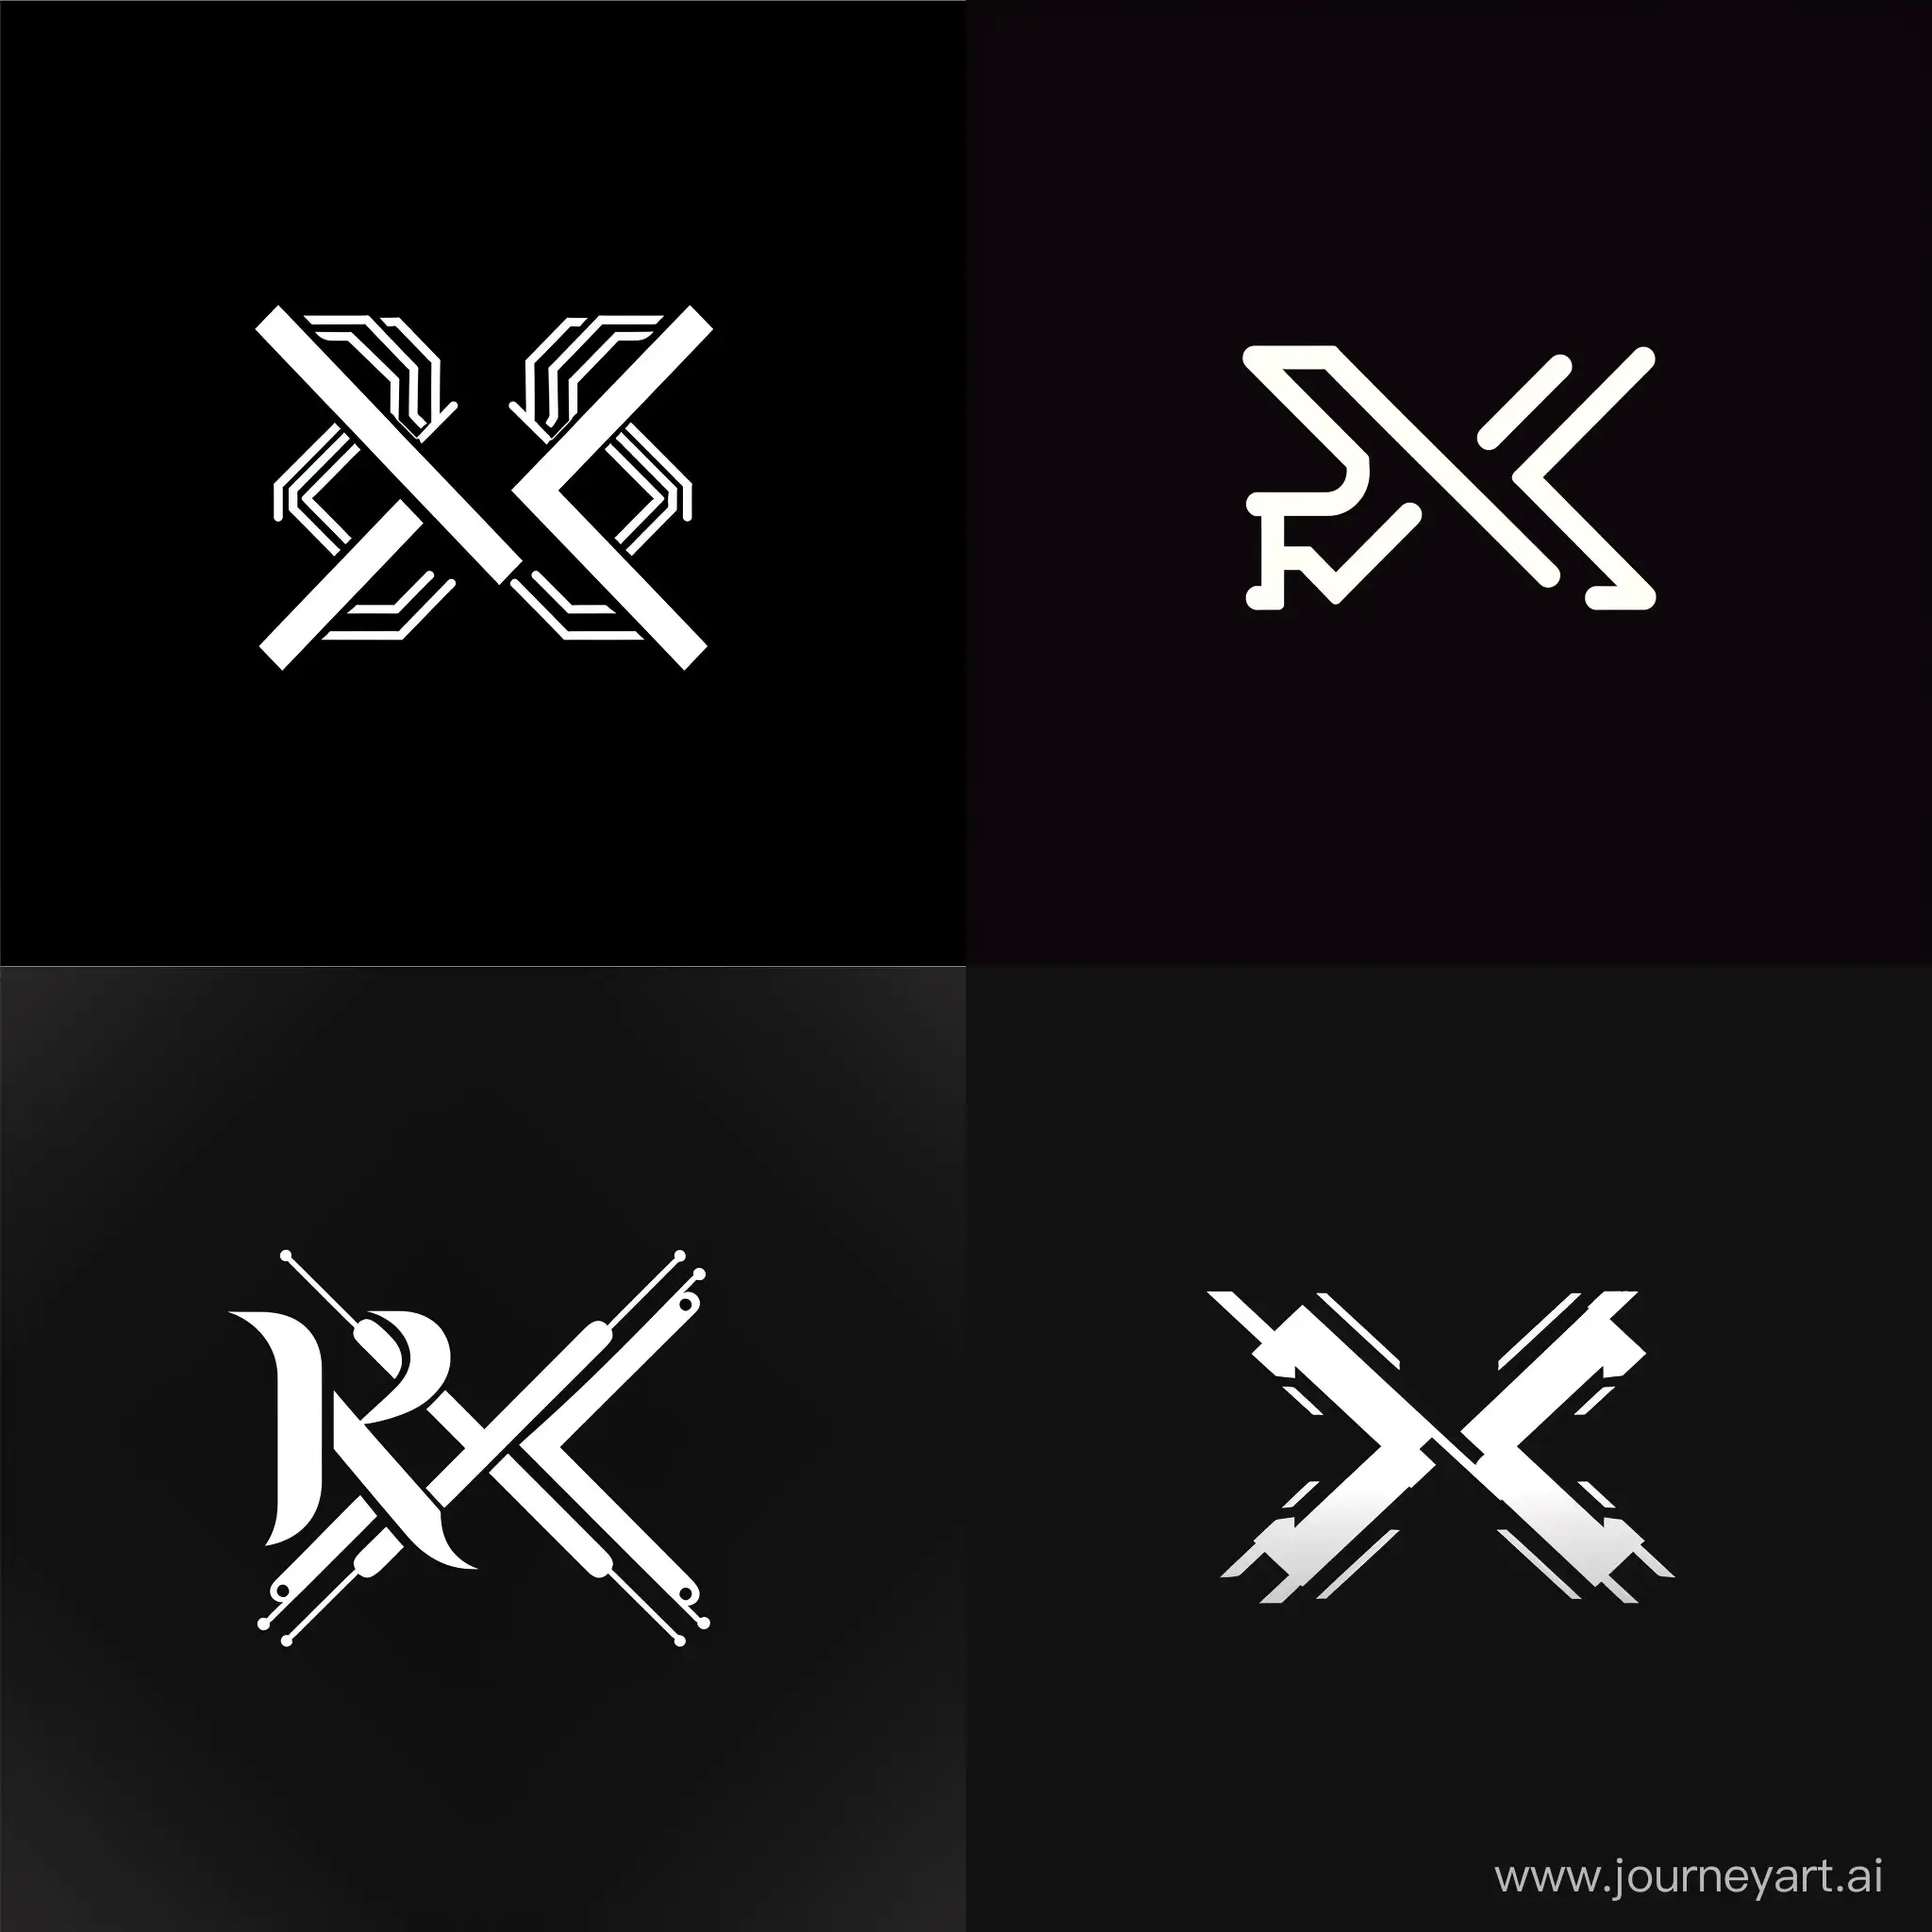 Logo, art. The logo consists of two stylised crossed letters R and K. Theme Artificial Intelligence. Background black, letters white